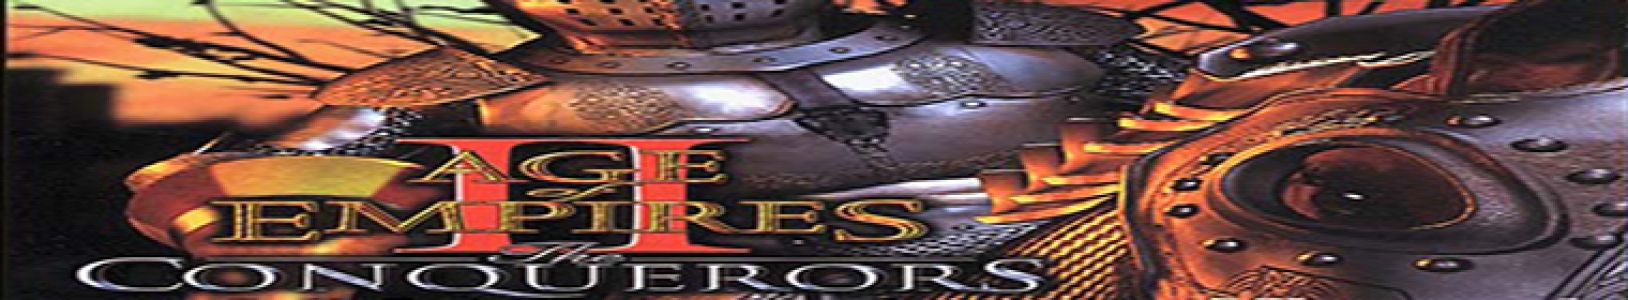 Age of Empires II: The Conquerors Expansion banner